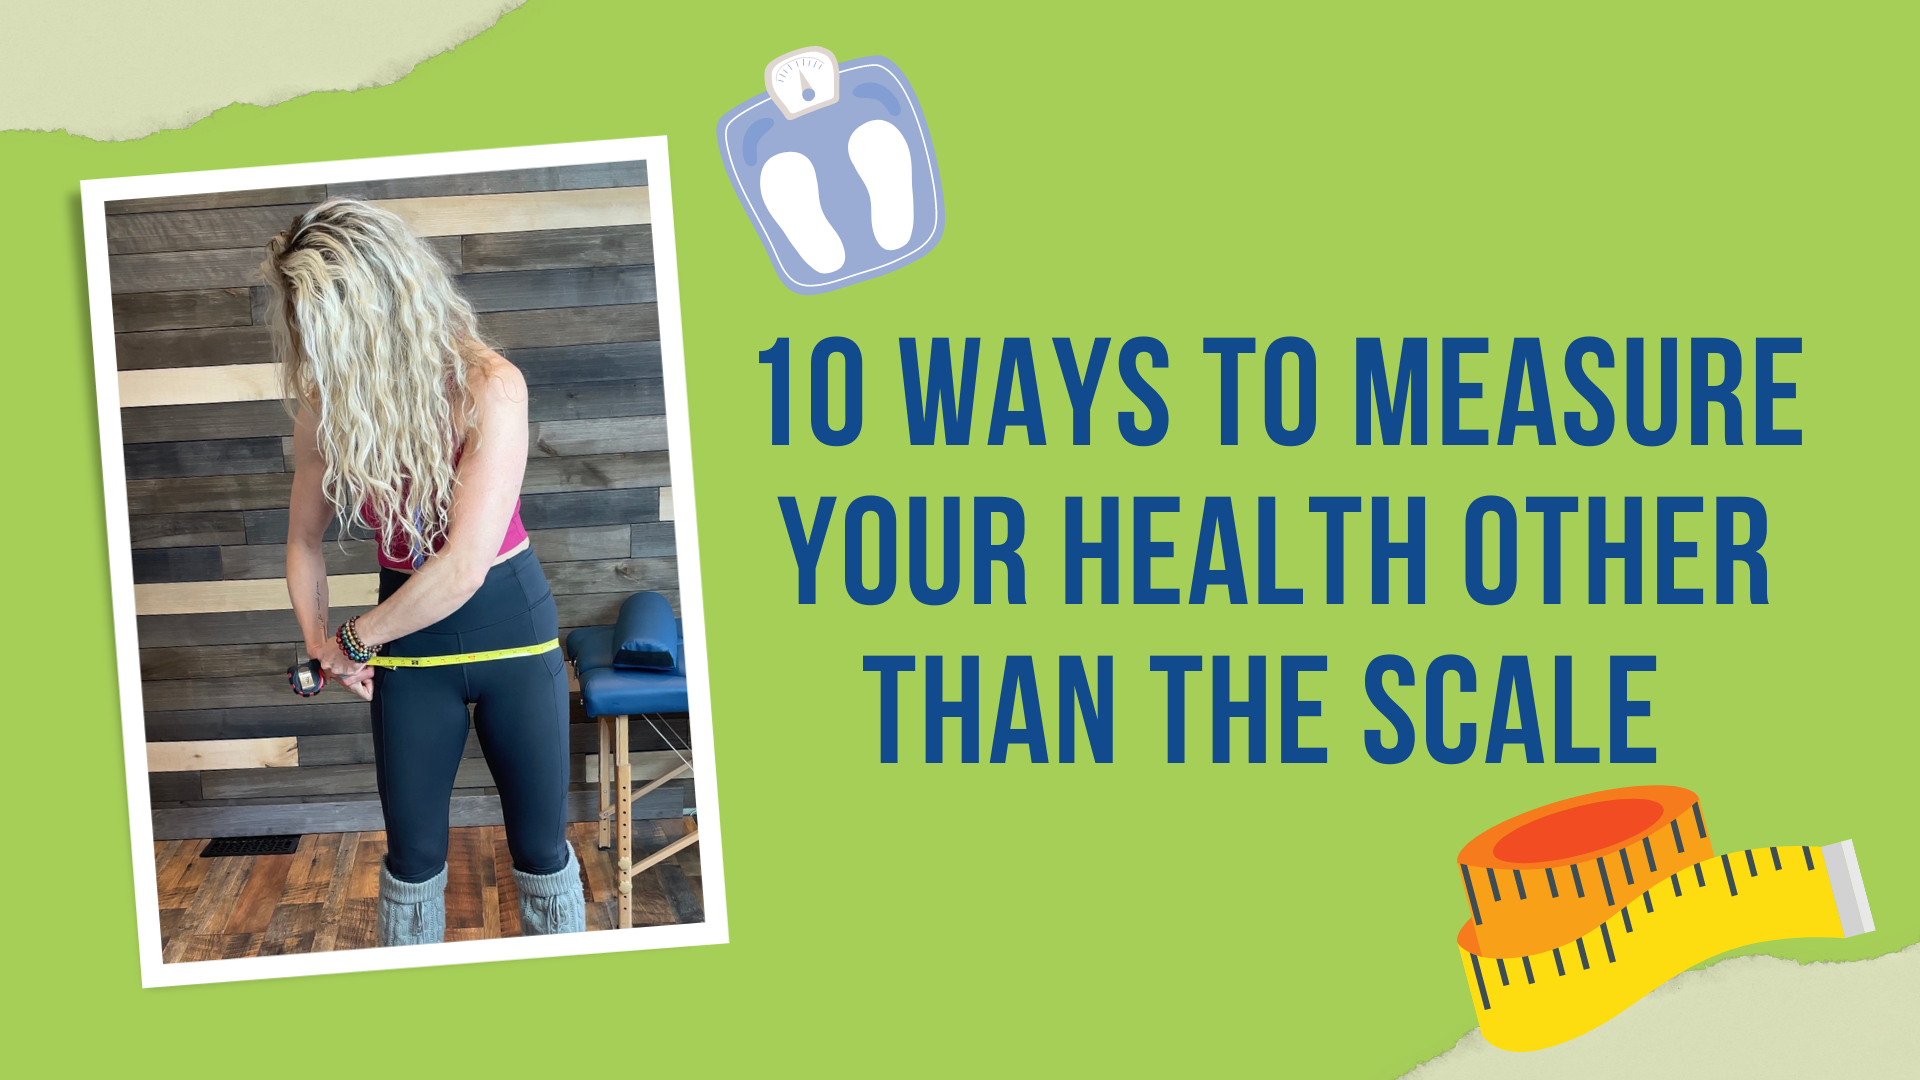 10 ways to measure your health that’s not the scale